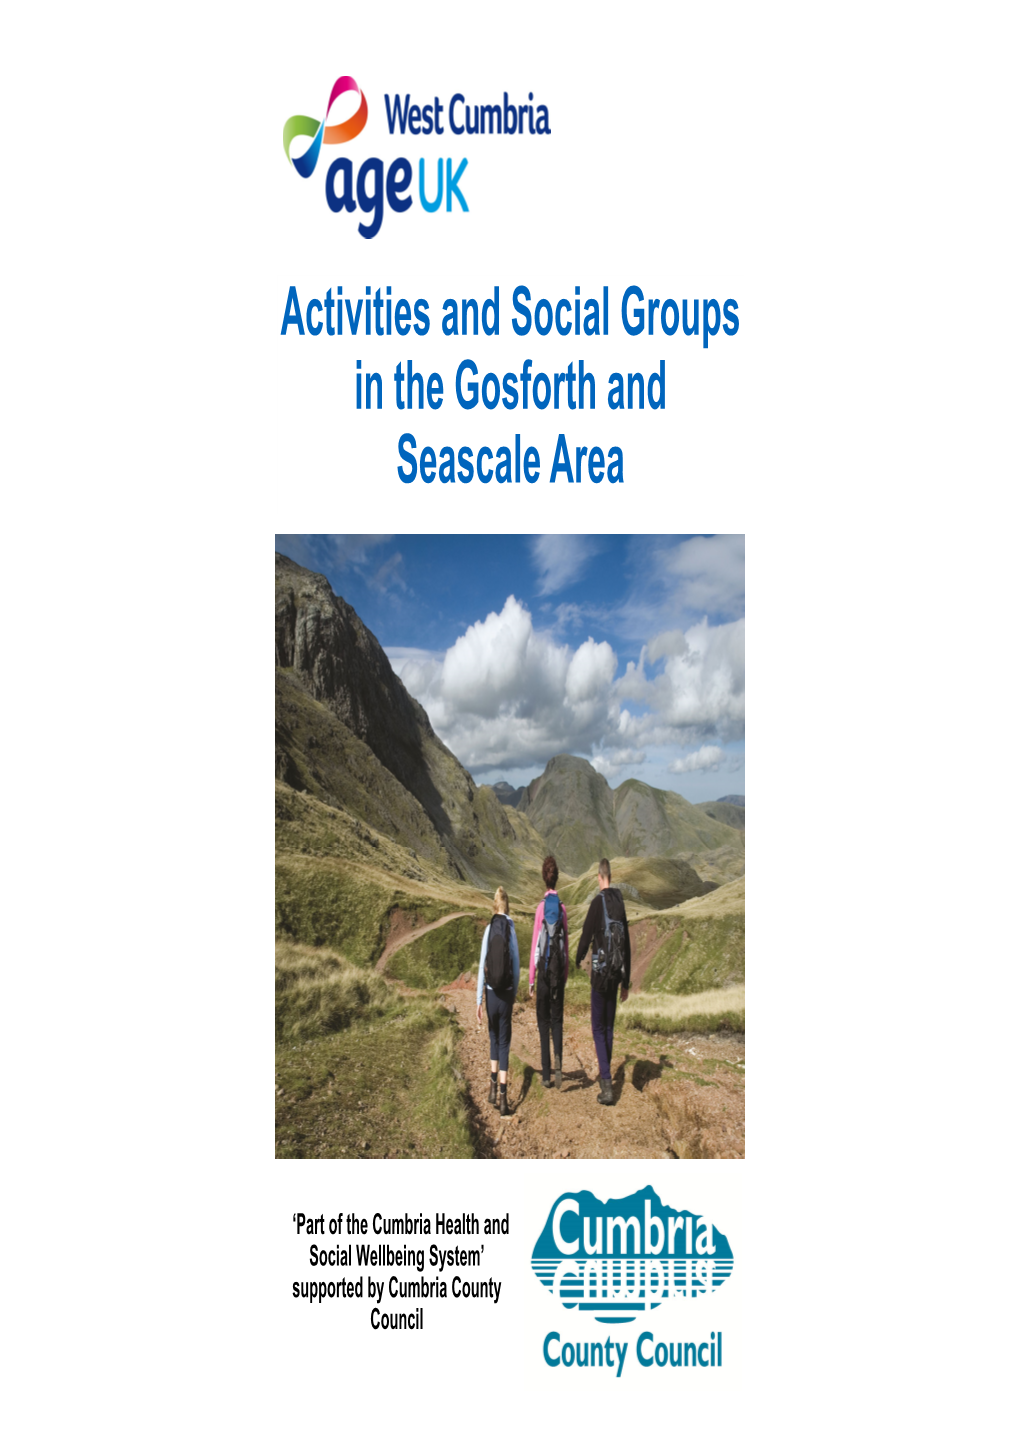 Activities and Social Groups in the Gosforth and Seascale Area